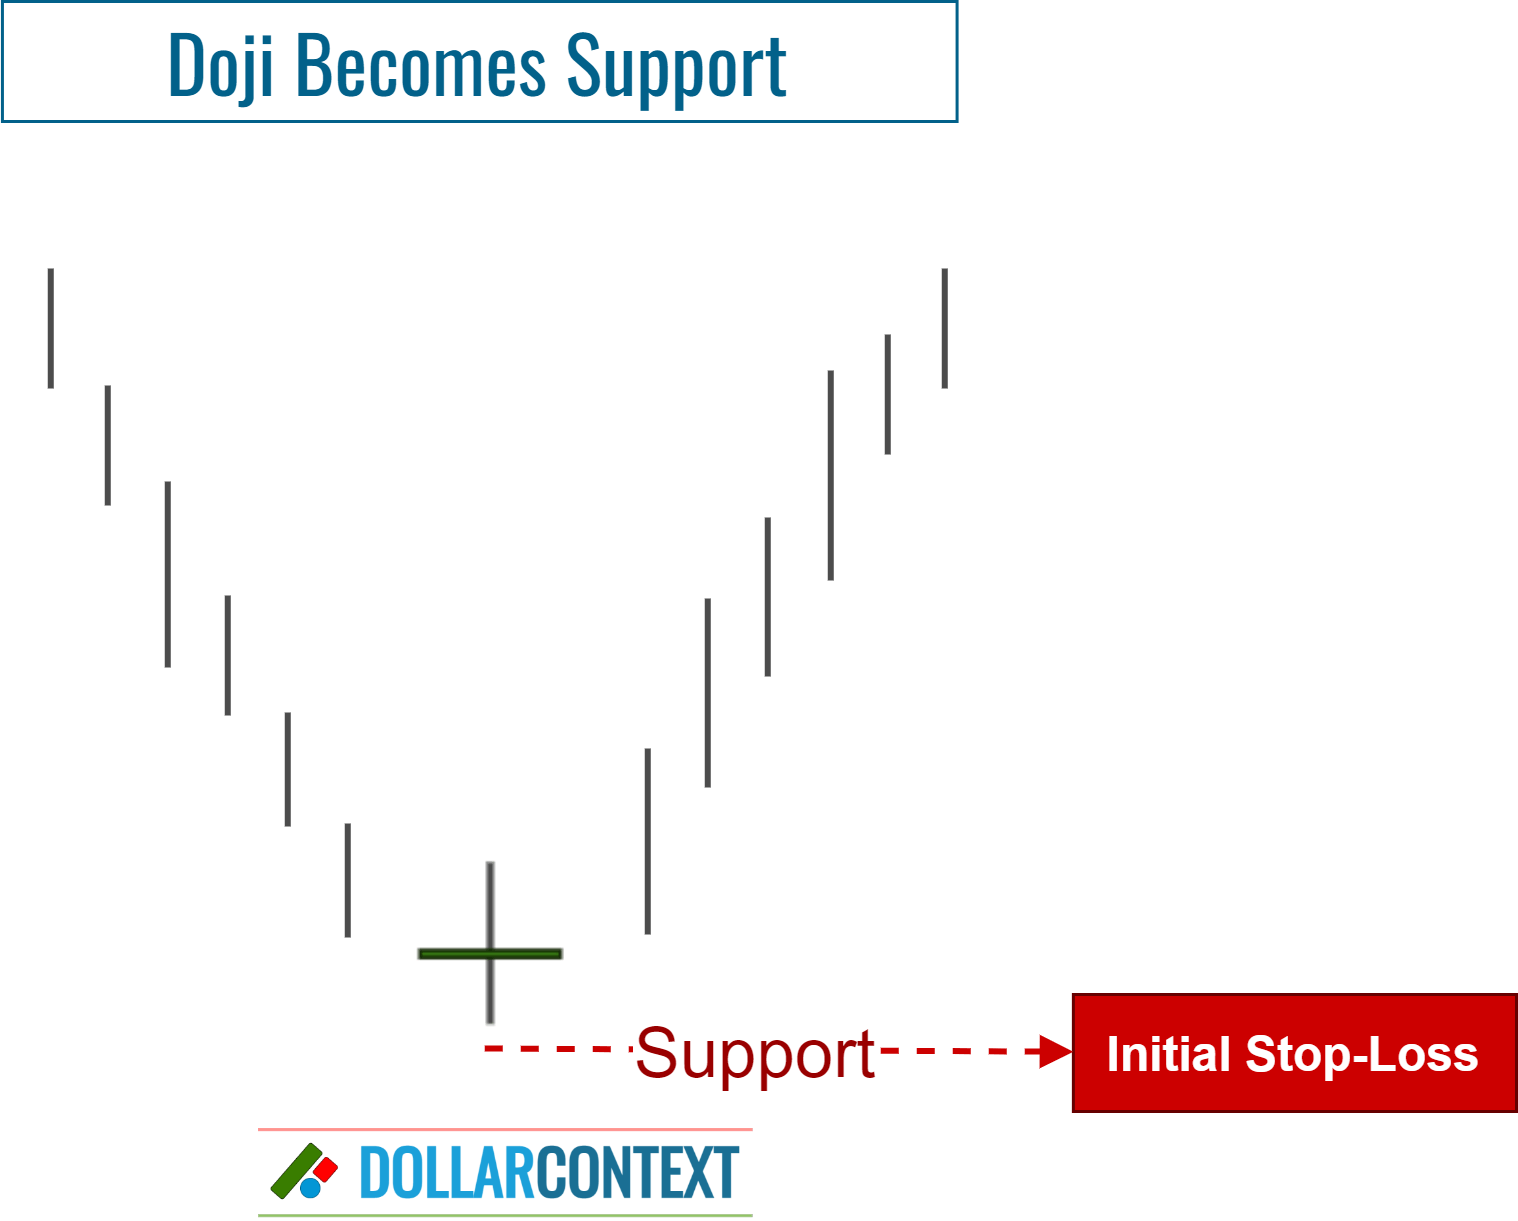 Initial Stop-Loss for a Doji After a Downtrend